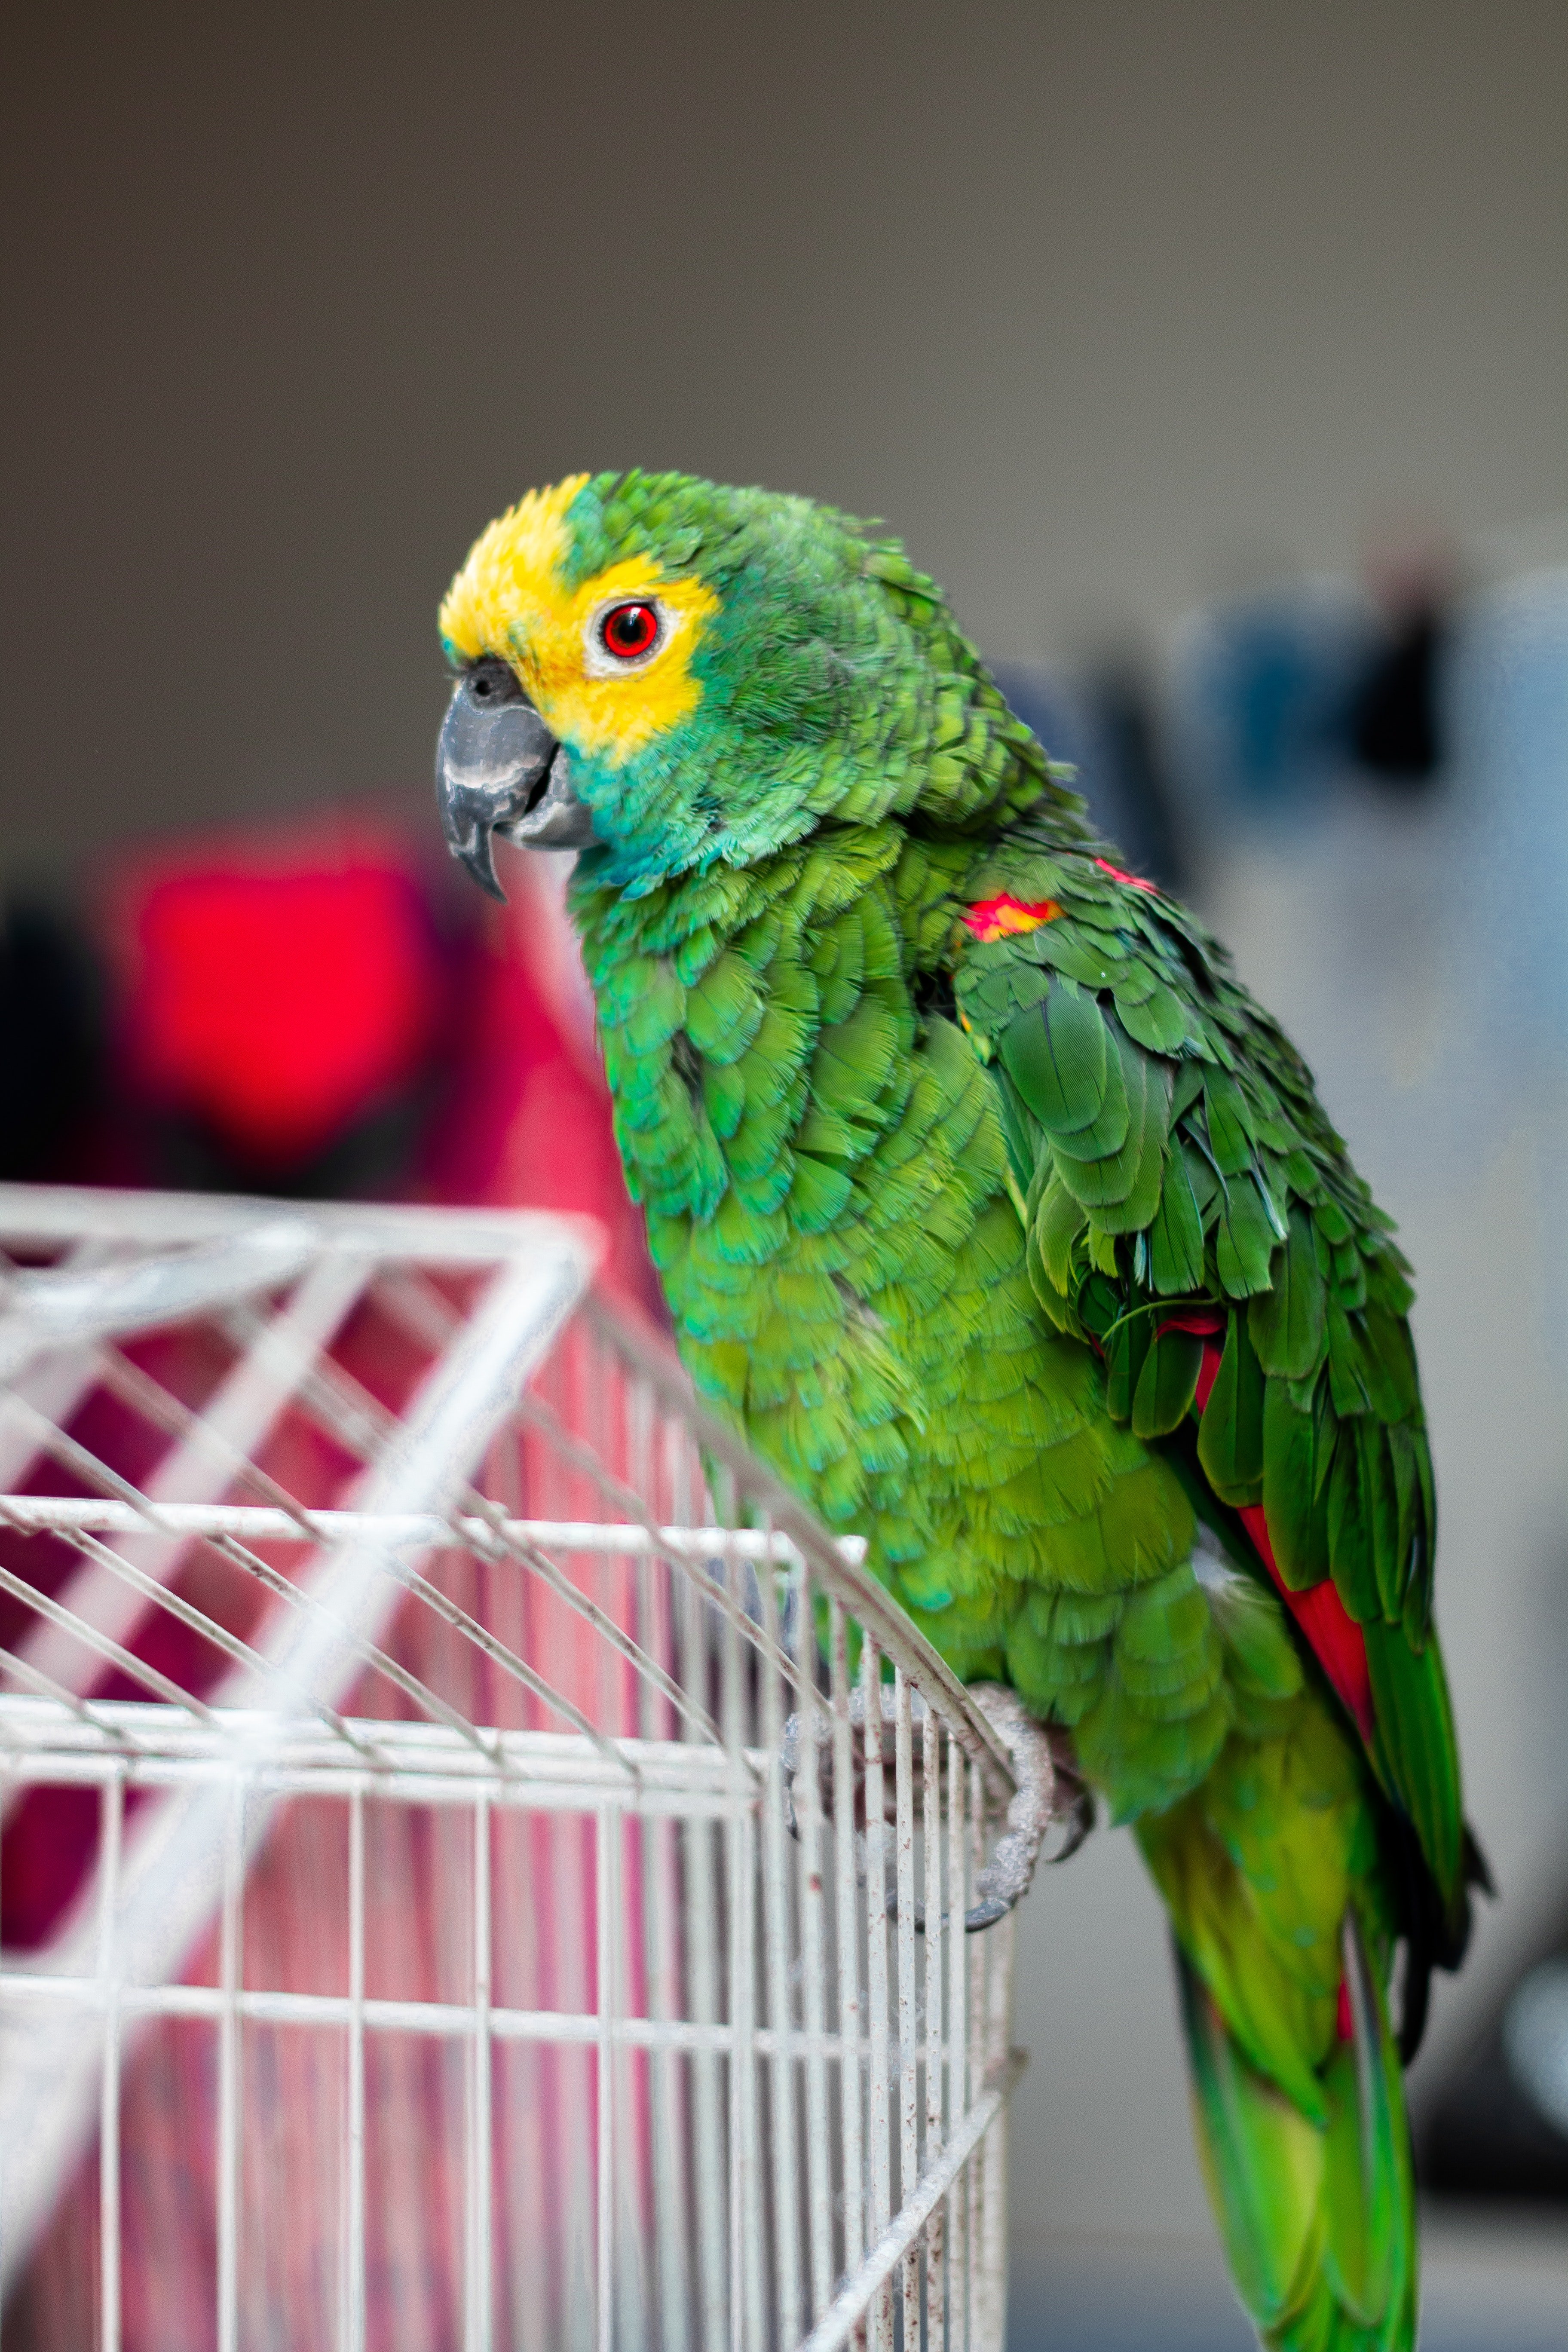 Eric bought a parrot for himself | Photo: Pexels